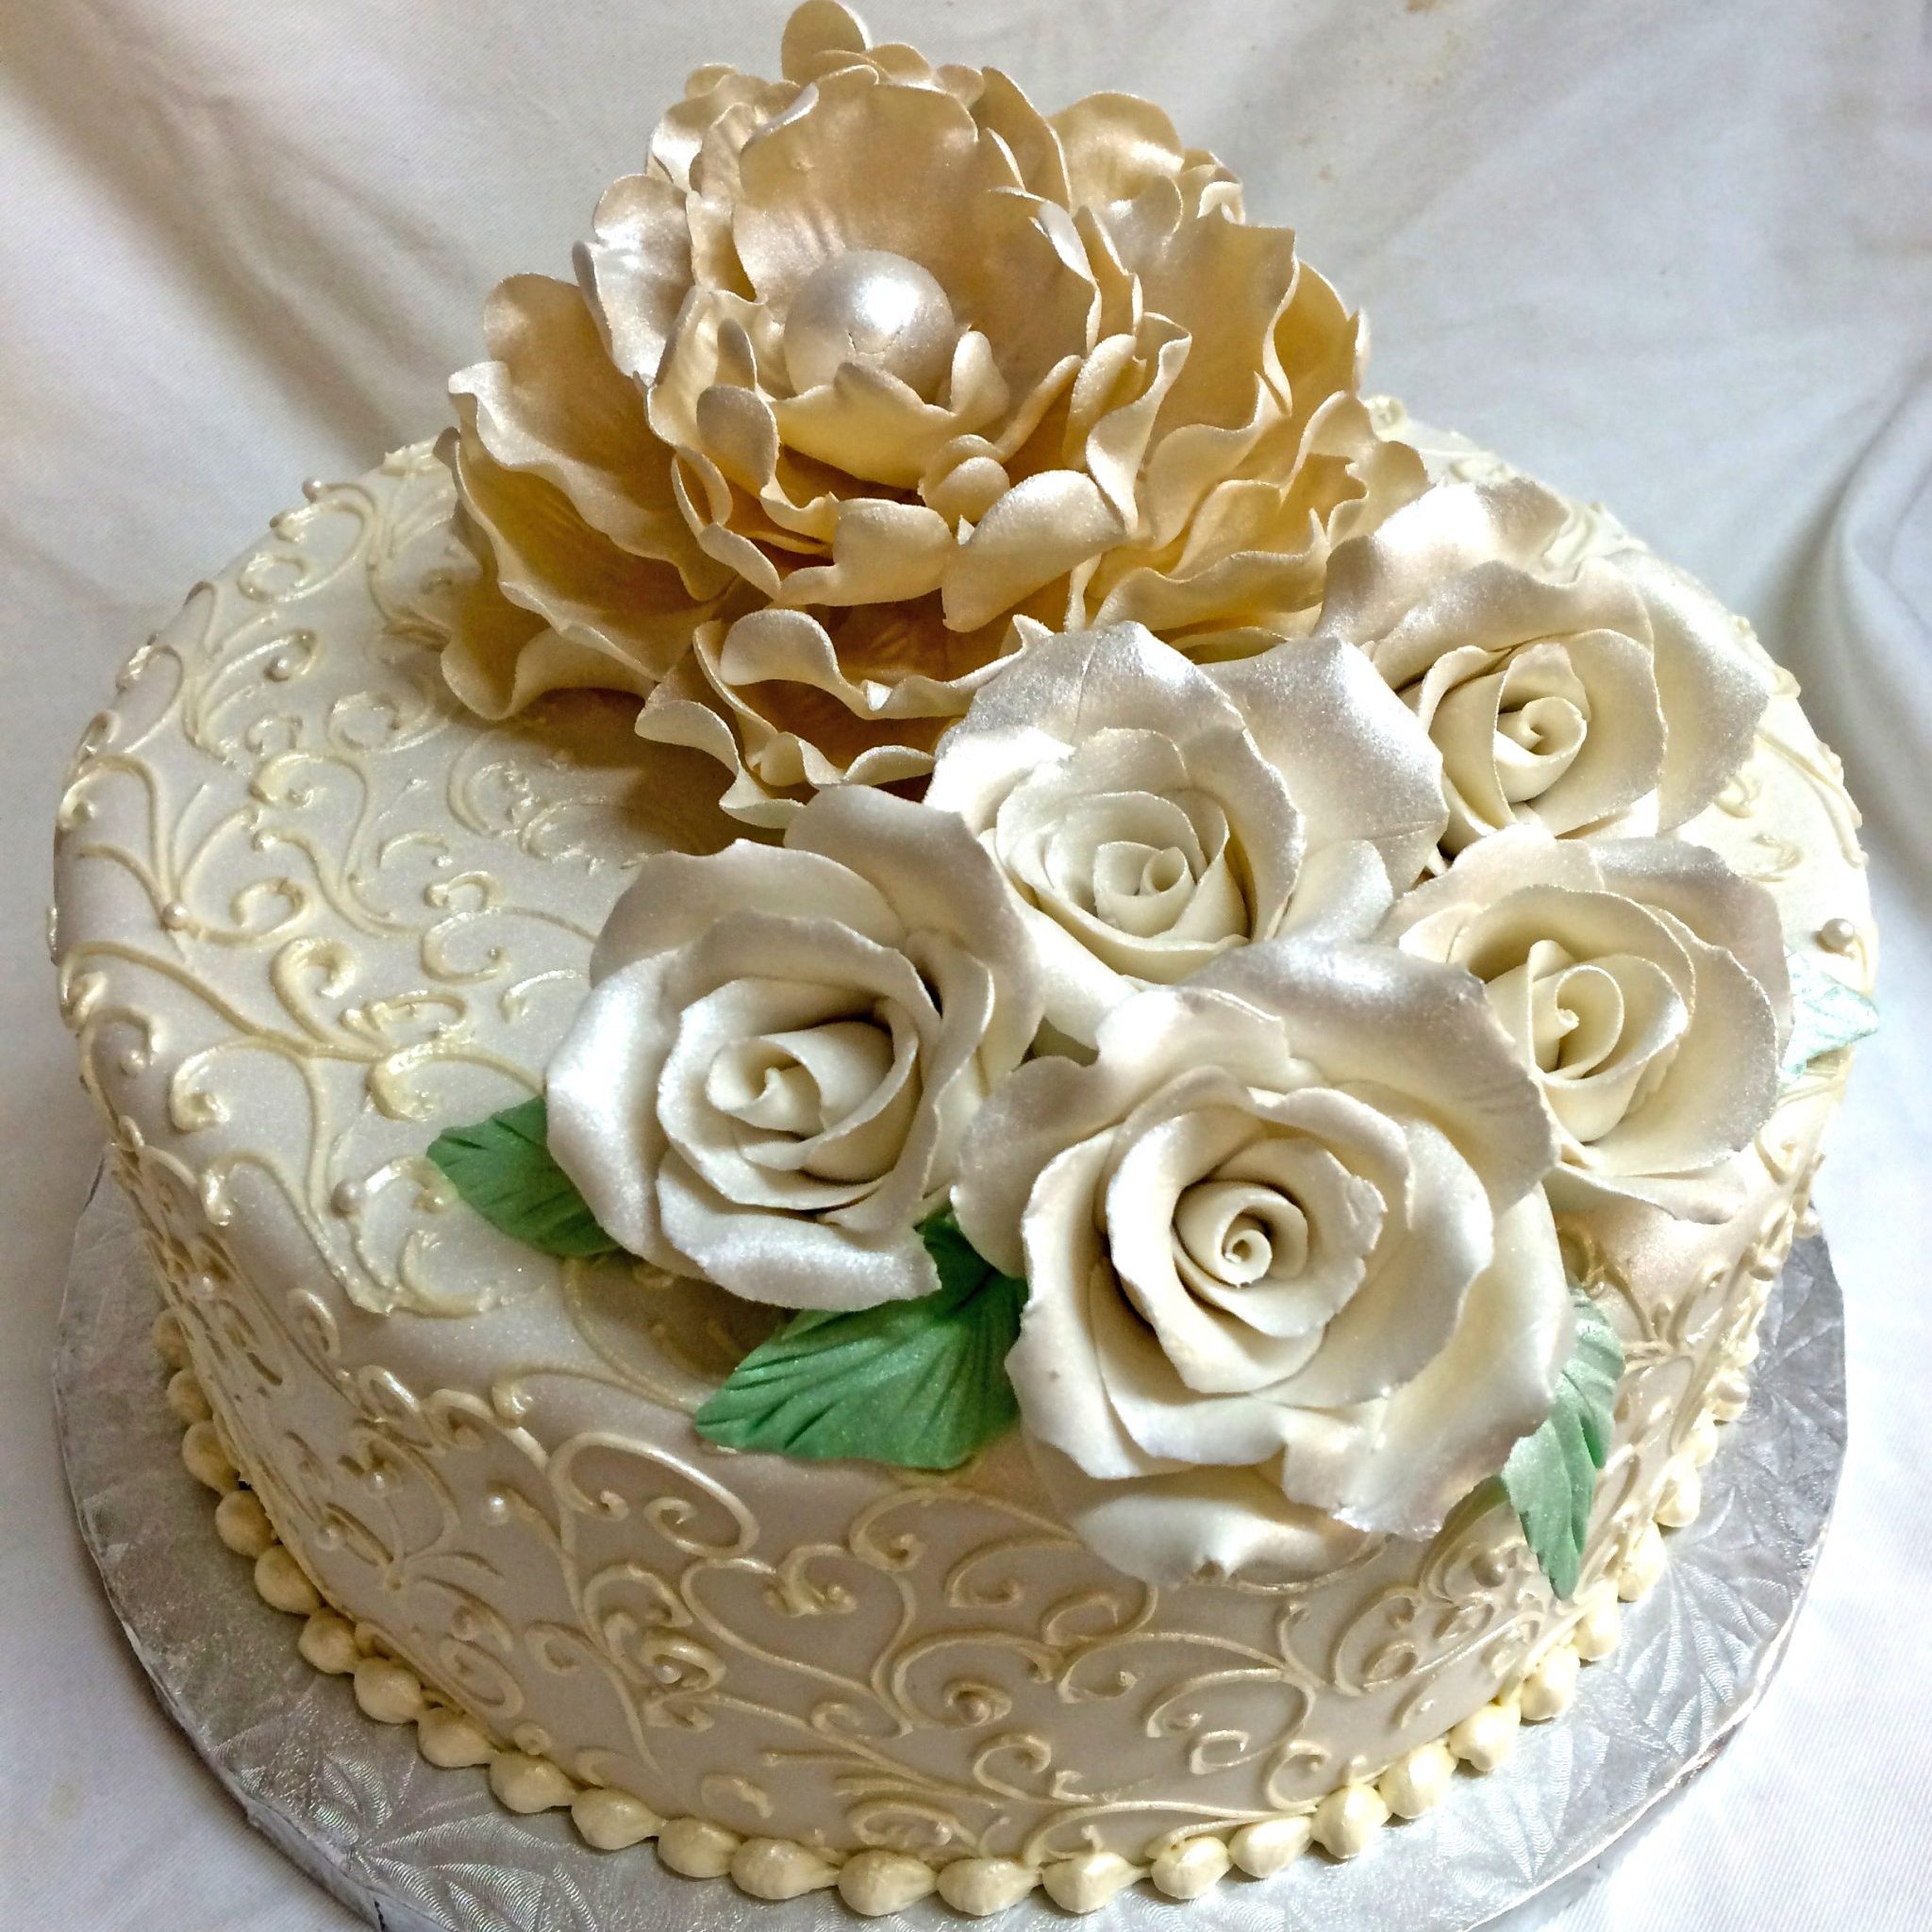 Beautiful white on white 1-tier wedding cake by Willow Cakes & Pastries